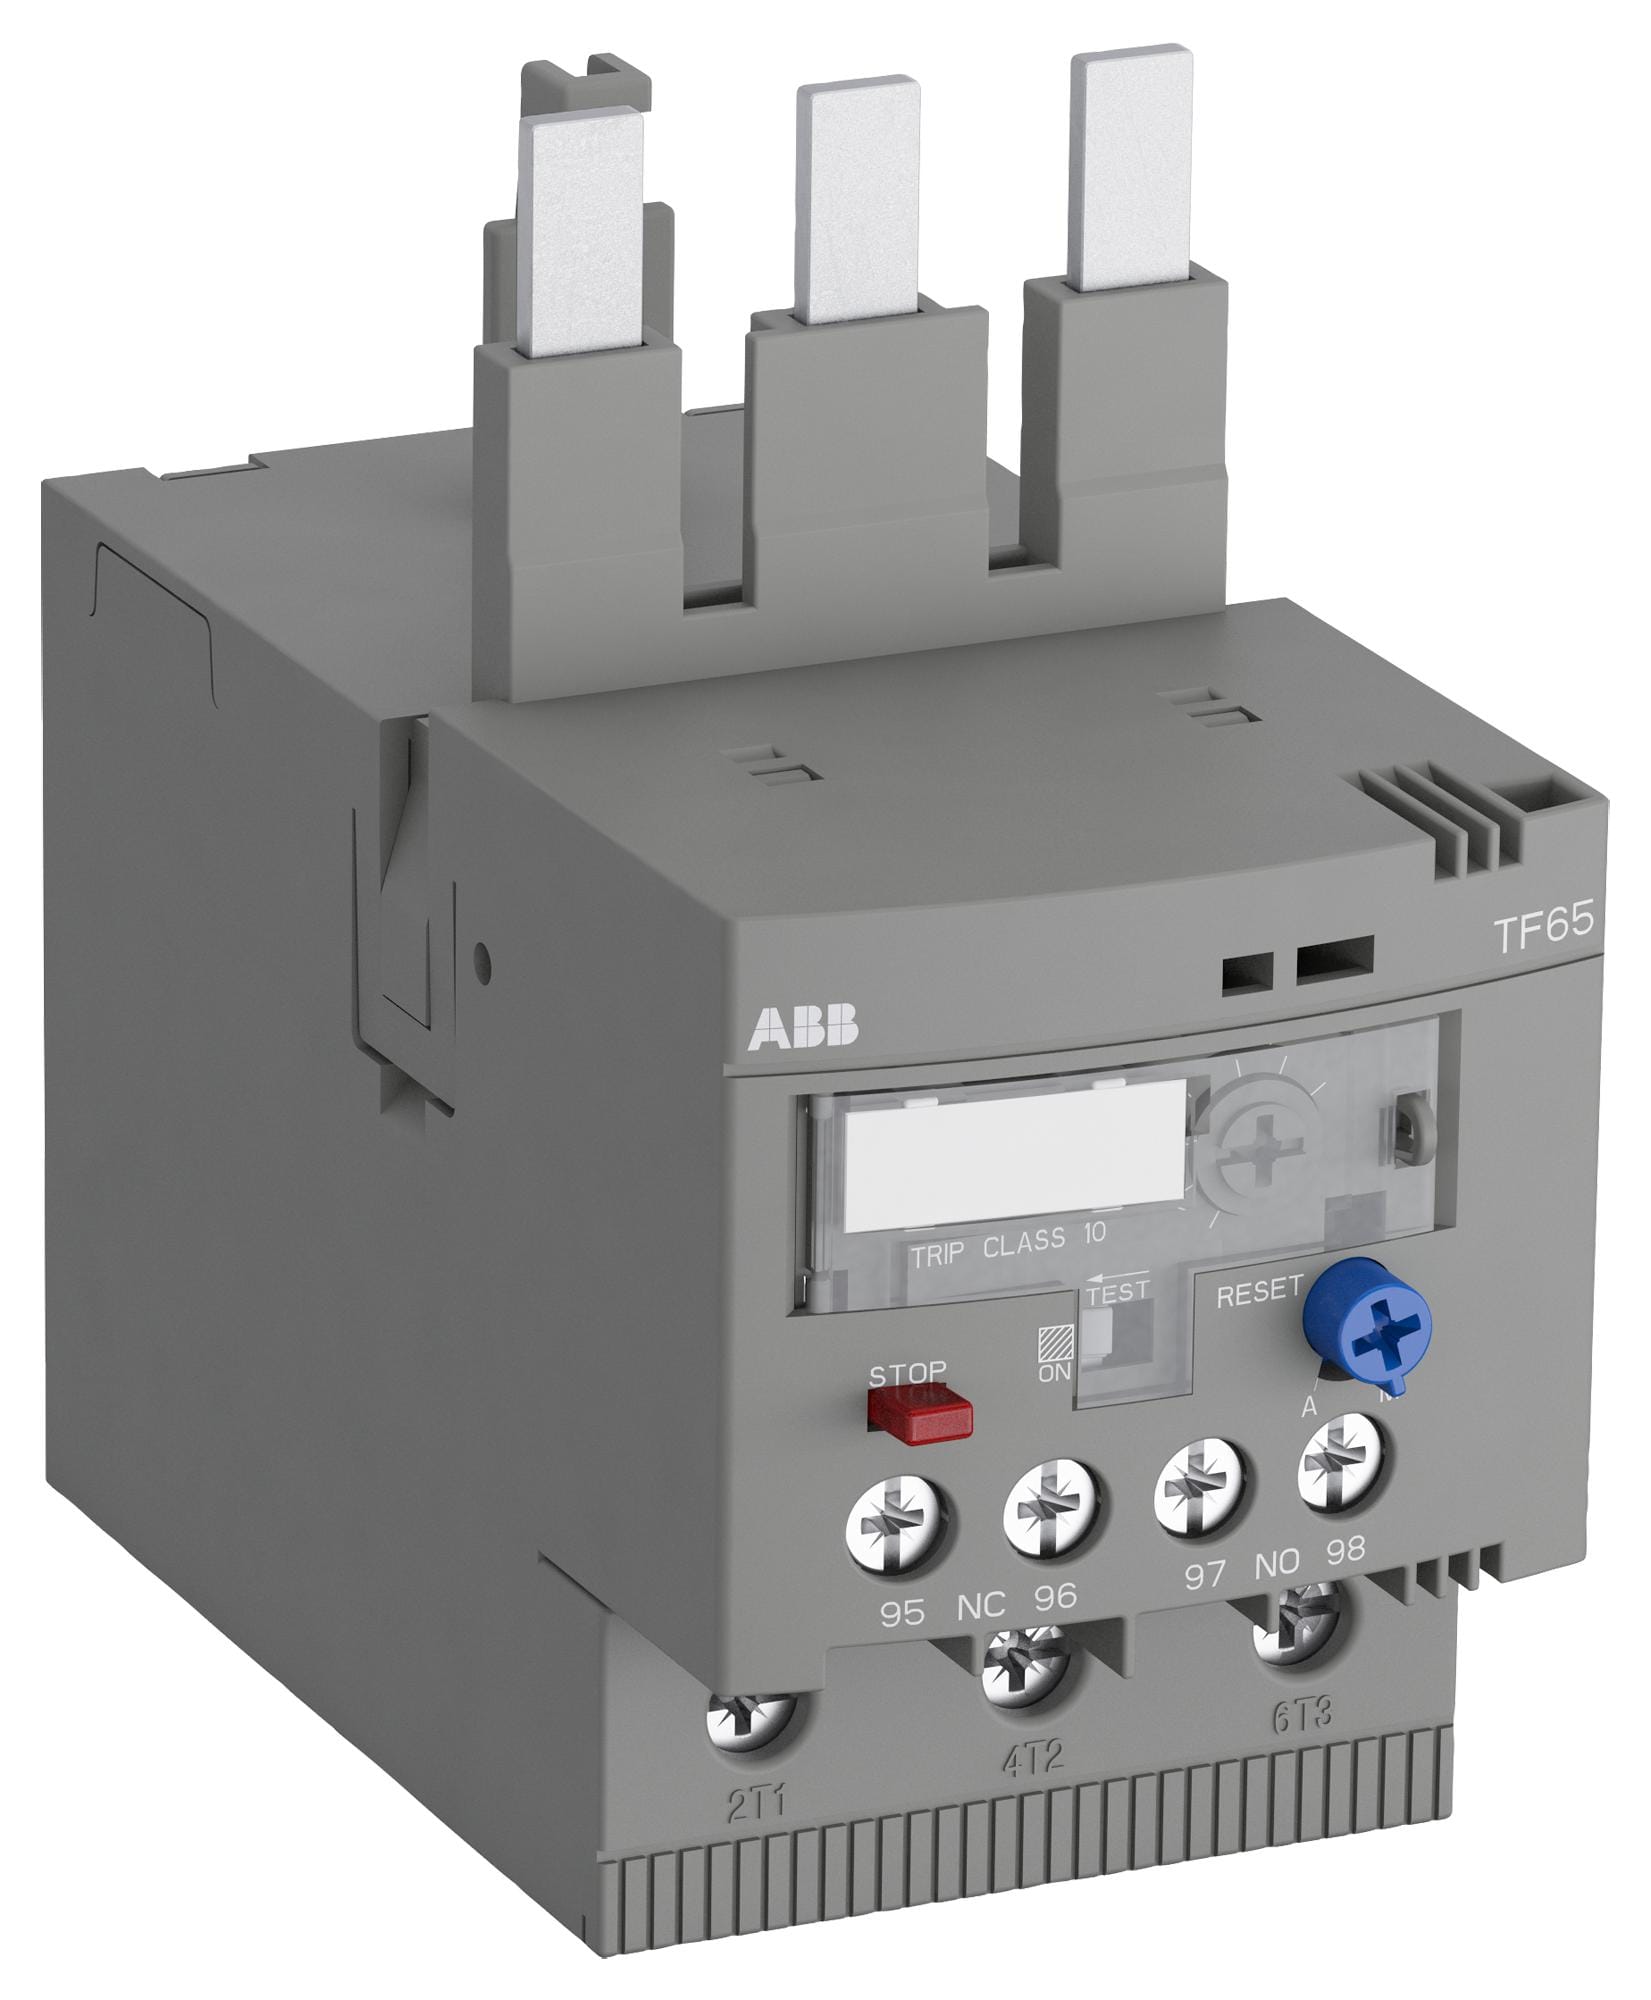 ABB Thermal Overload TF65-60 THERMAL OVERLOAD RELAY, 3 POLE, 690V ABB 2565023 TF65-60